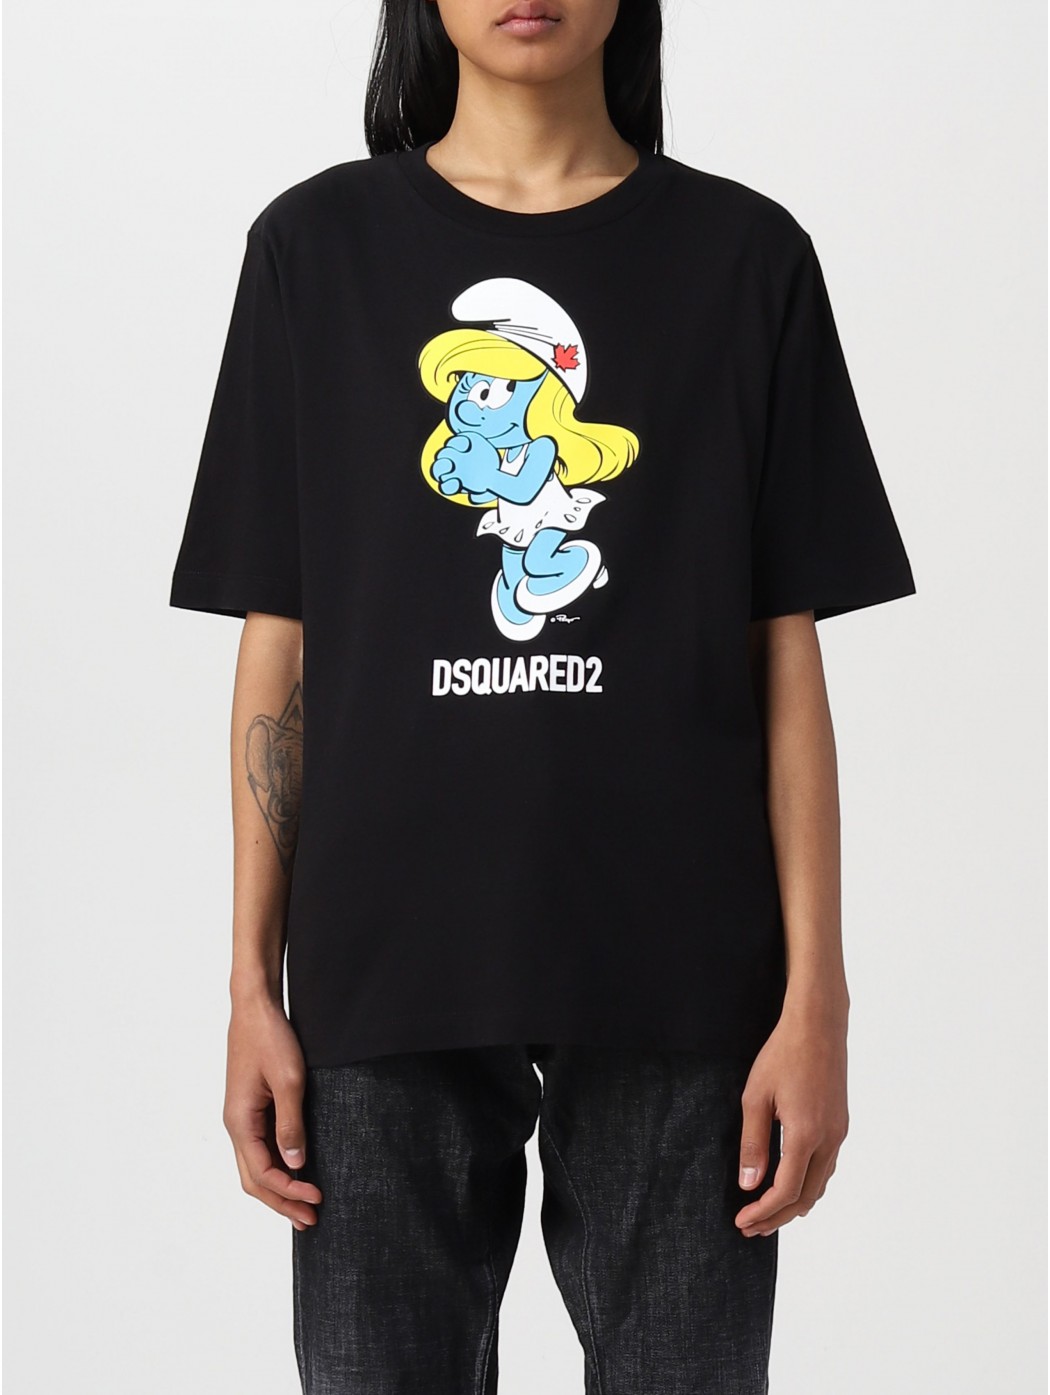 T-SHIRT DS2 SMURF  DSQUARED2